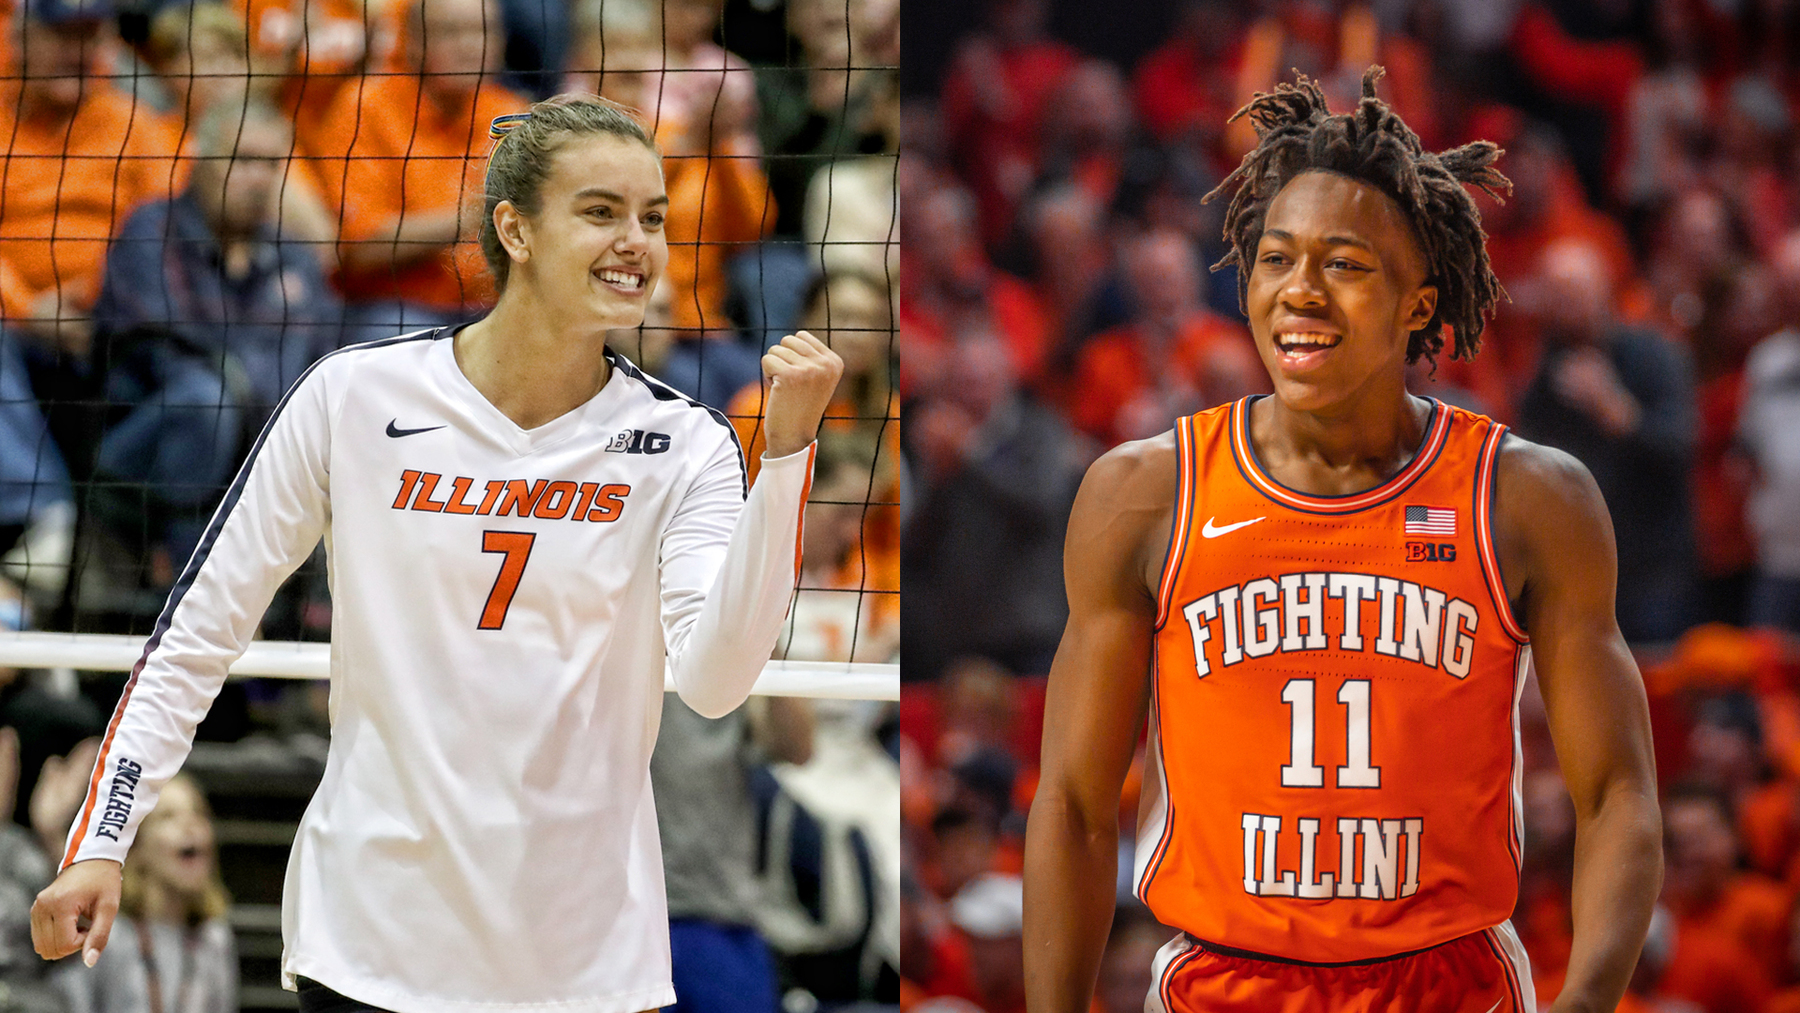 side-by-side photos of Jaqueline Quade and Ayo Dosunmu